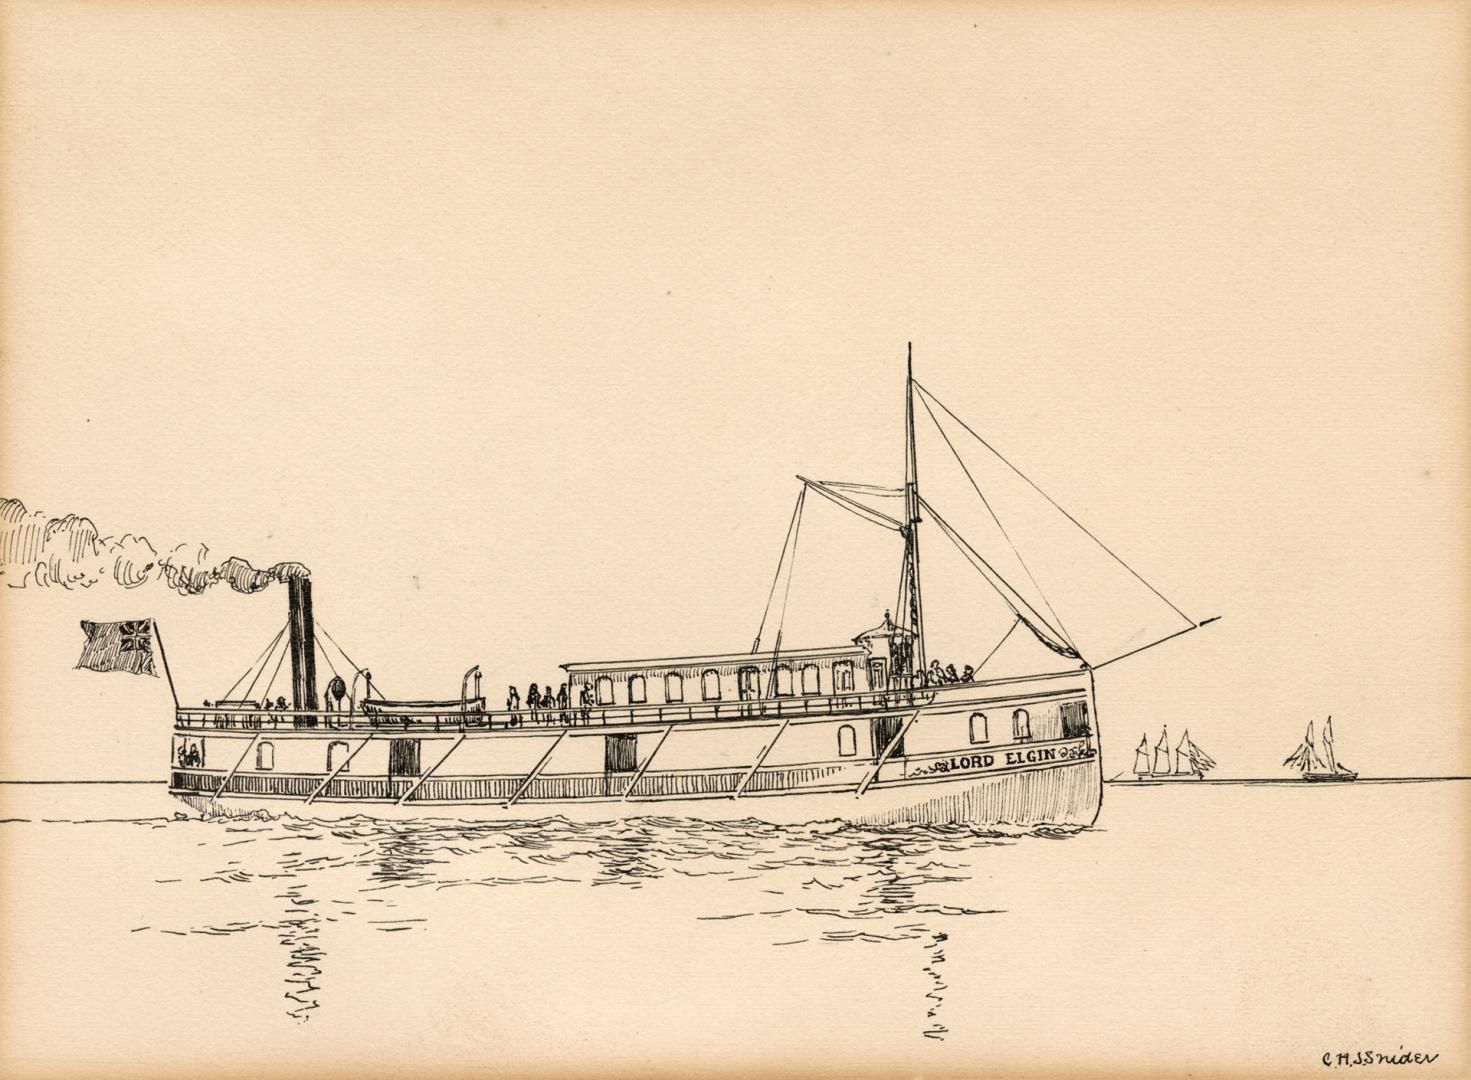 An illustration of a steamboat on a body of water, with two boats faintly visible far off in th ...